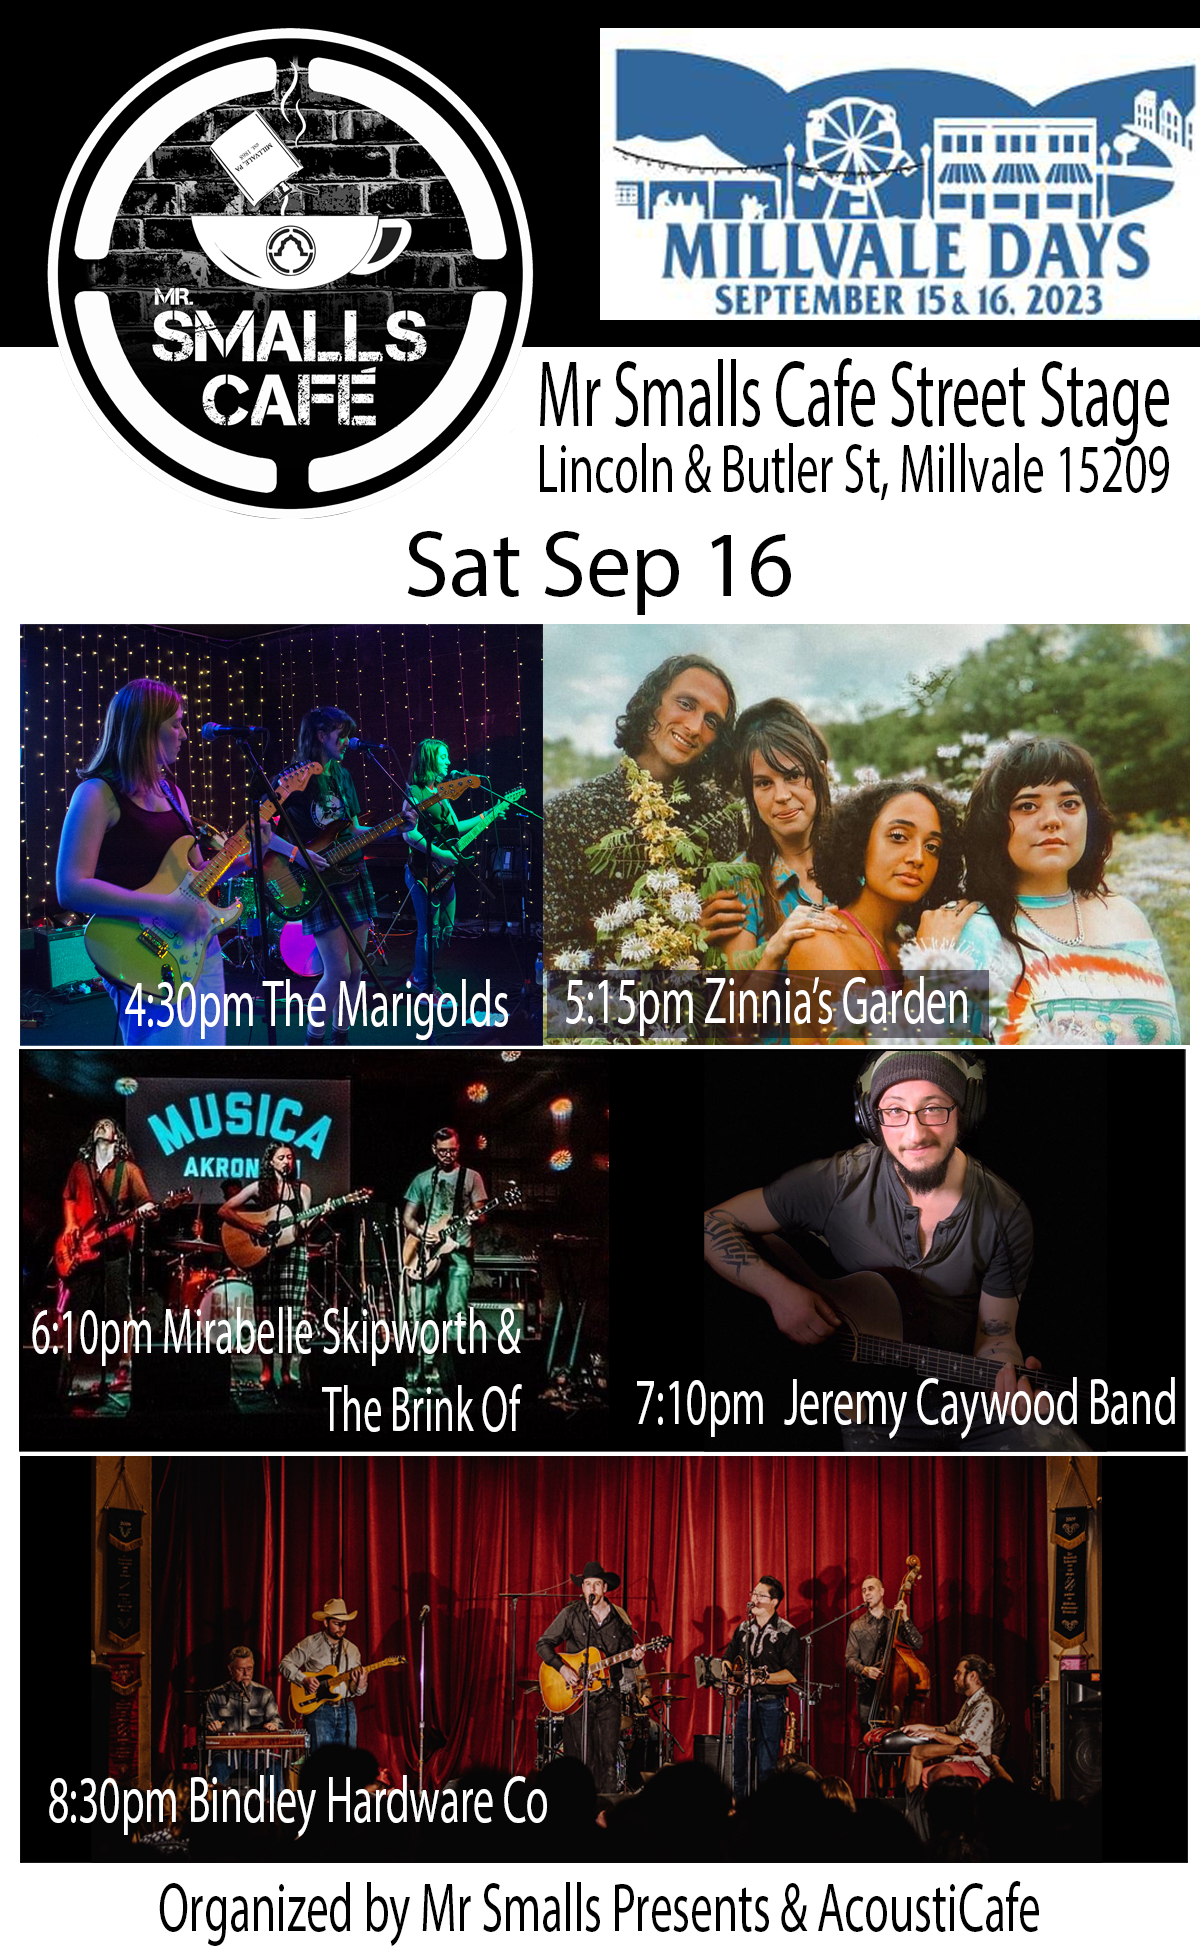 Saturday Lineup of Mr Smalls Cafe Street Stage for Millvale Days 2023